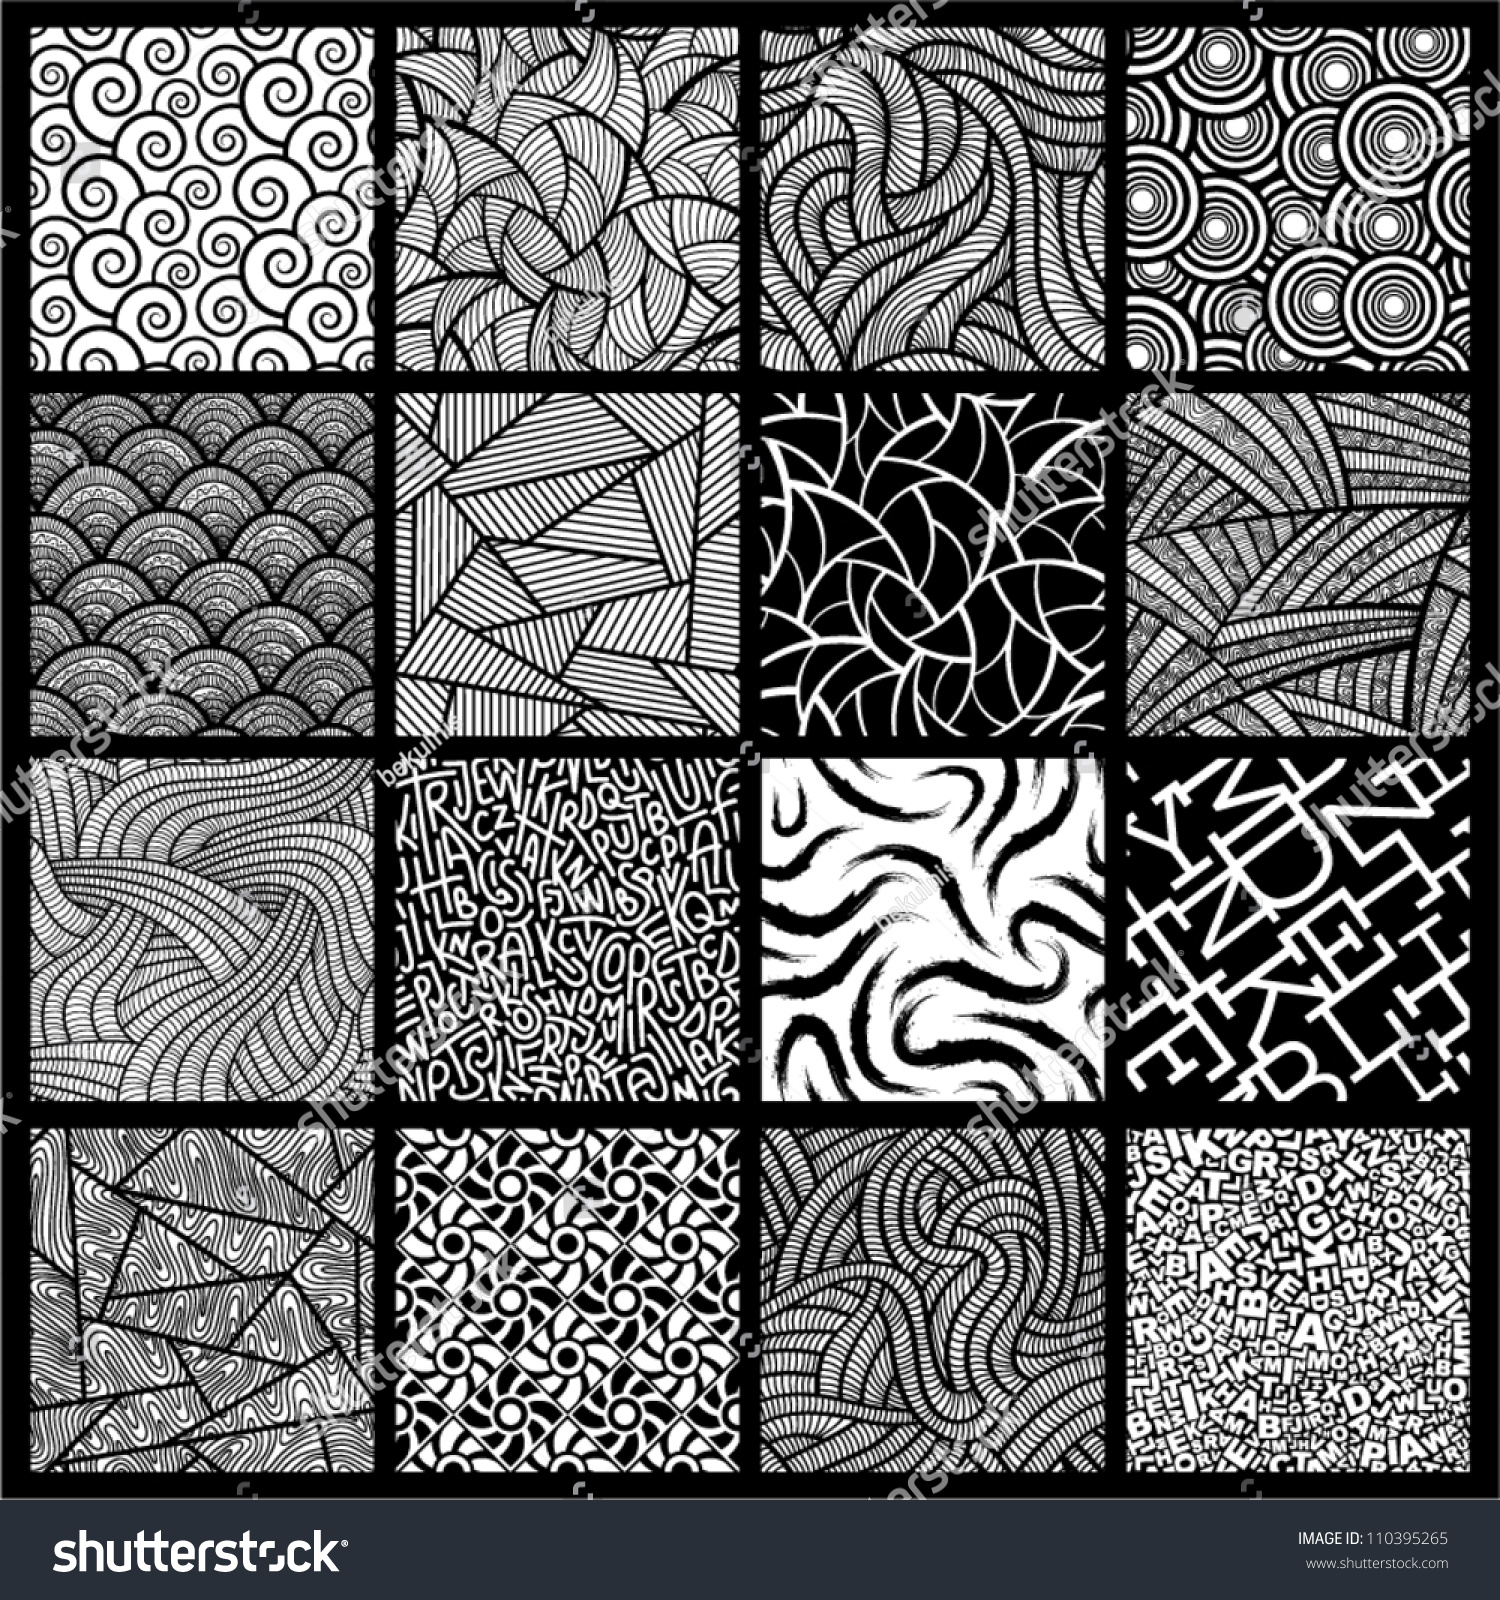 16 Black And White Seamless Vector Patterns. - 110395265 : Shutterstock